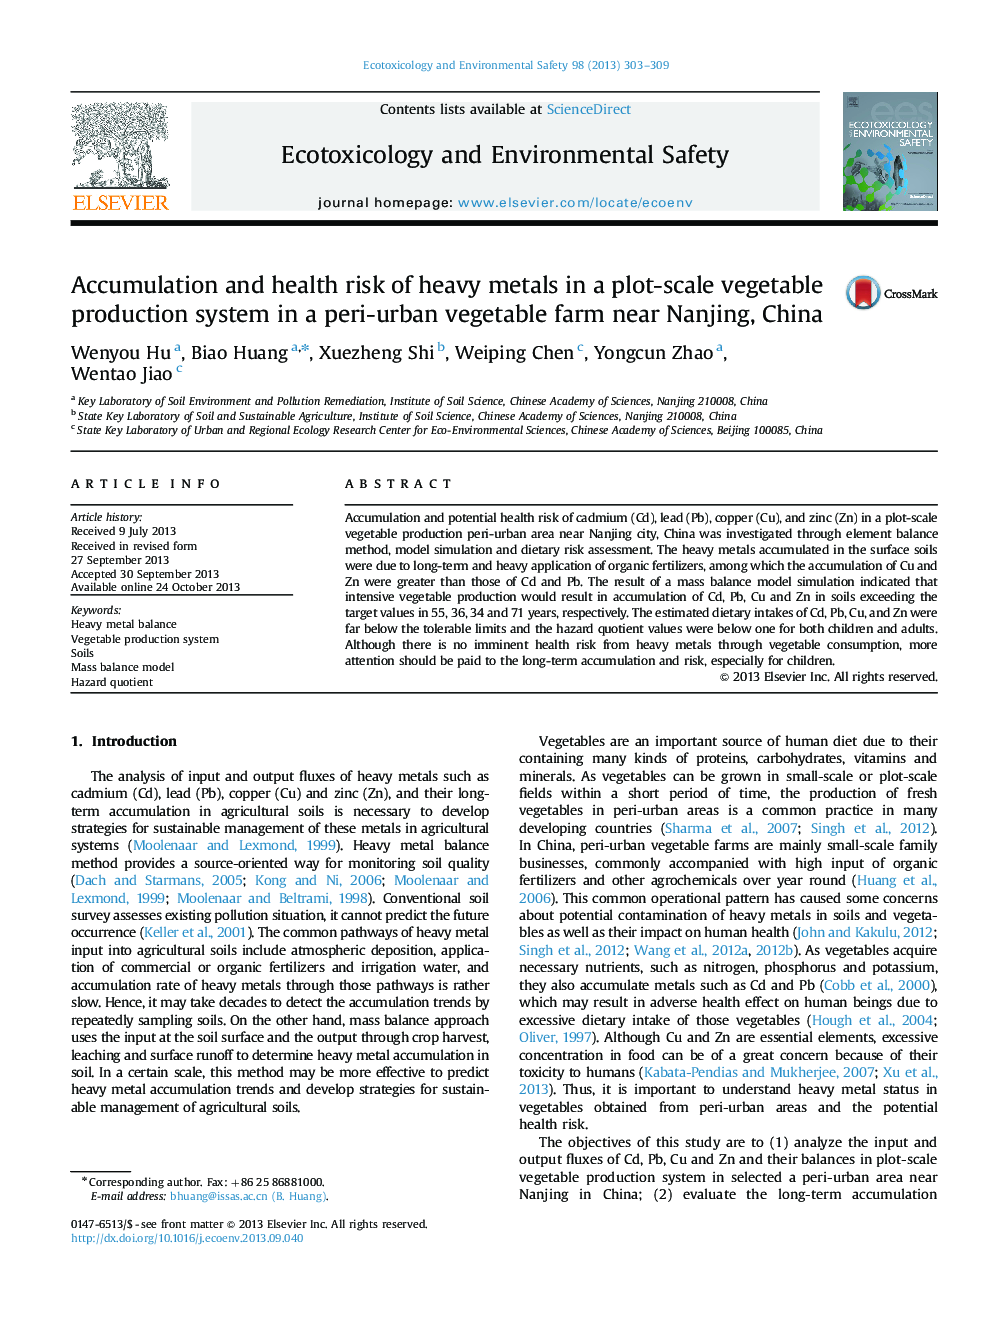 Accumulation and health risk of heavy metals in a plot-scale vegetable production system in a peri-urban vegetable farm near Nanjing, China